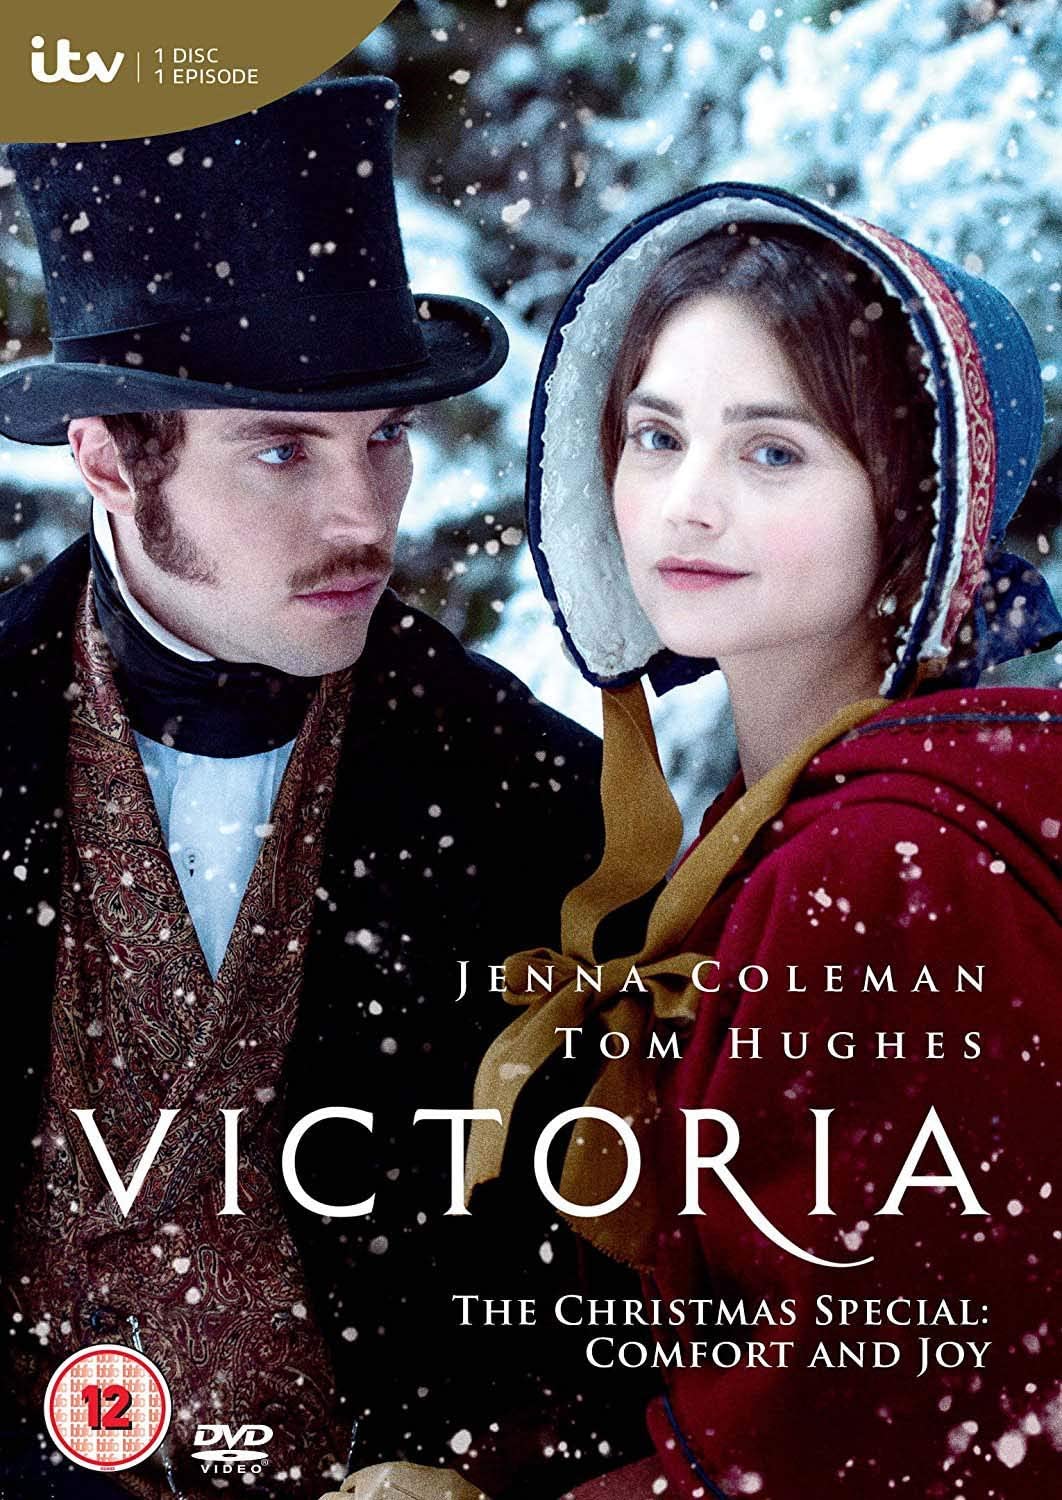 Victoria - The Christmas Special: Comfort and Joy [2017] - Drama [DVD]